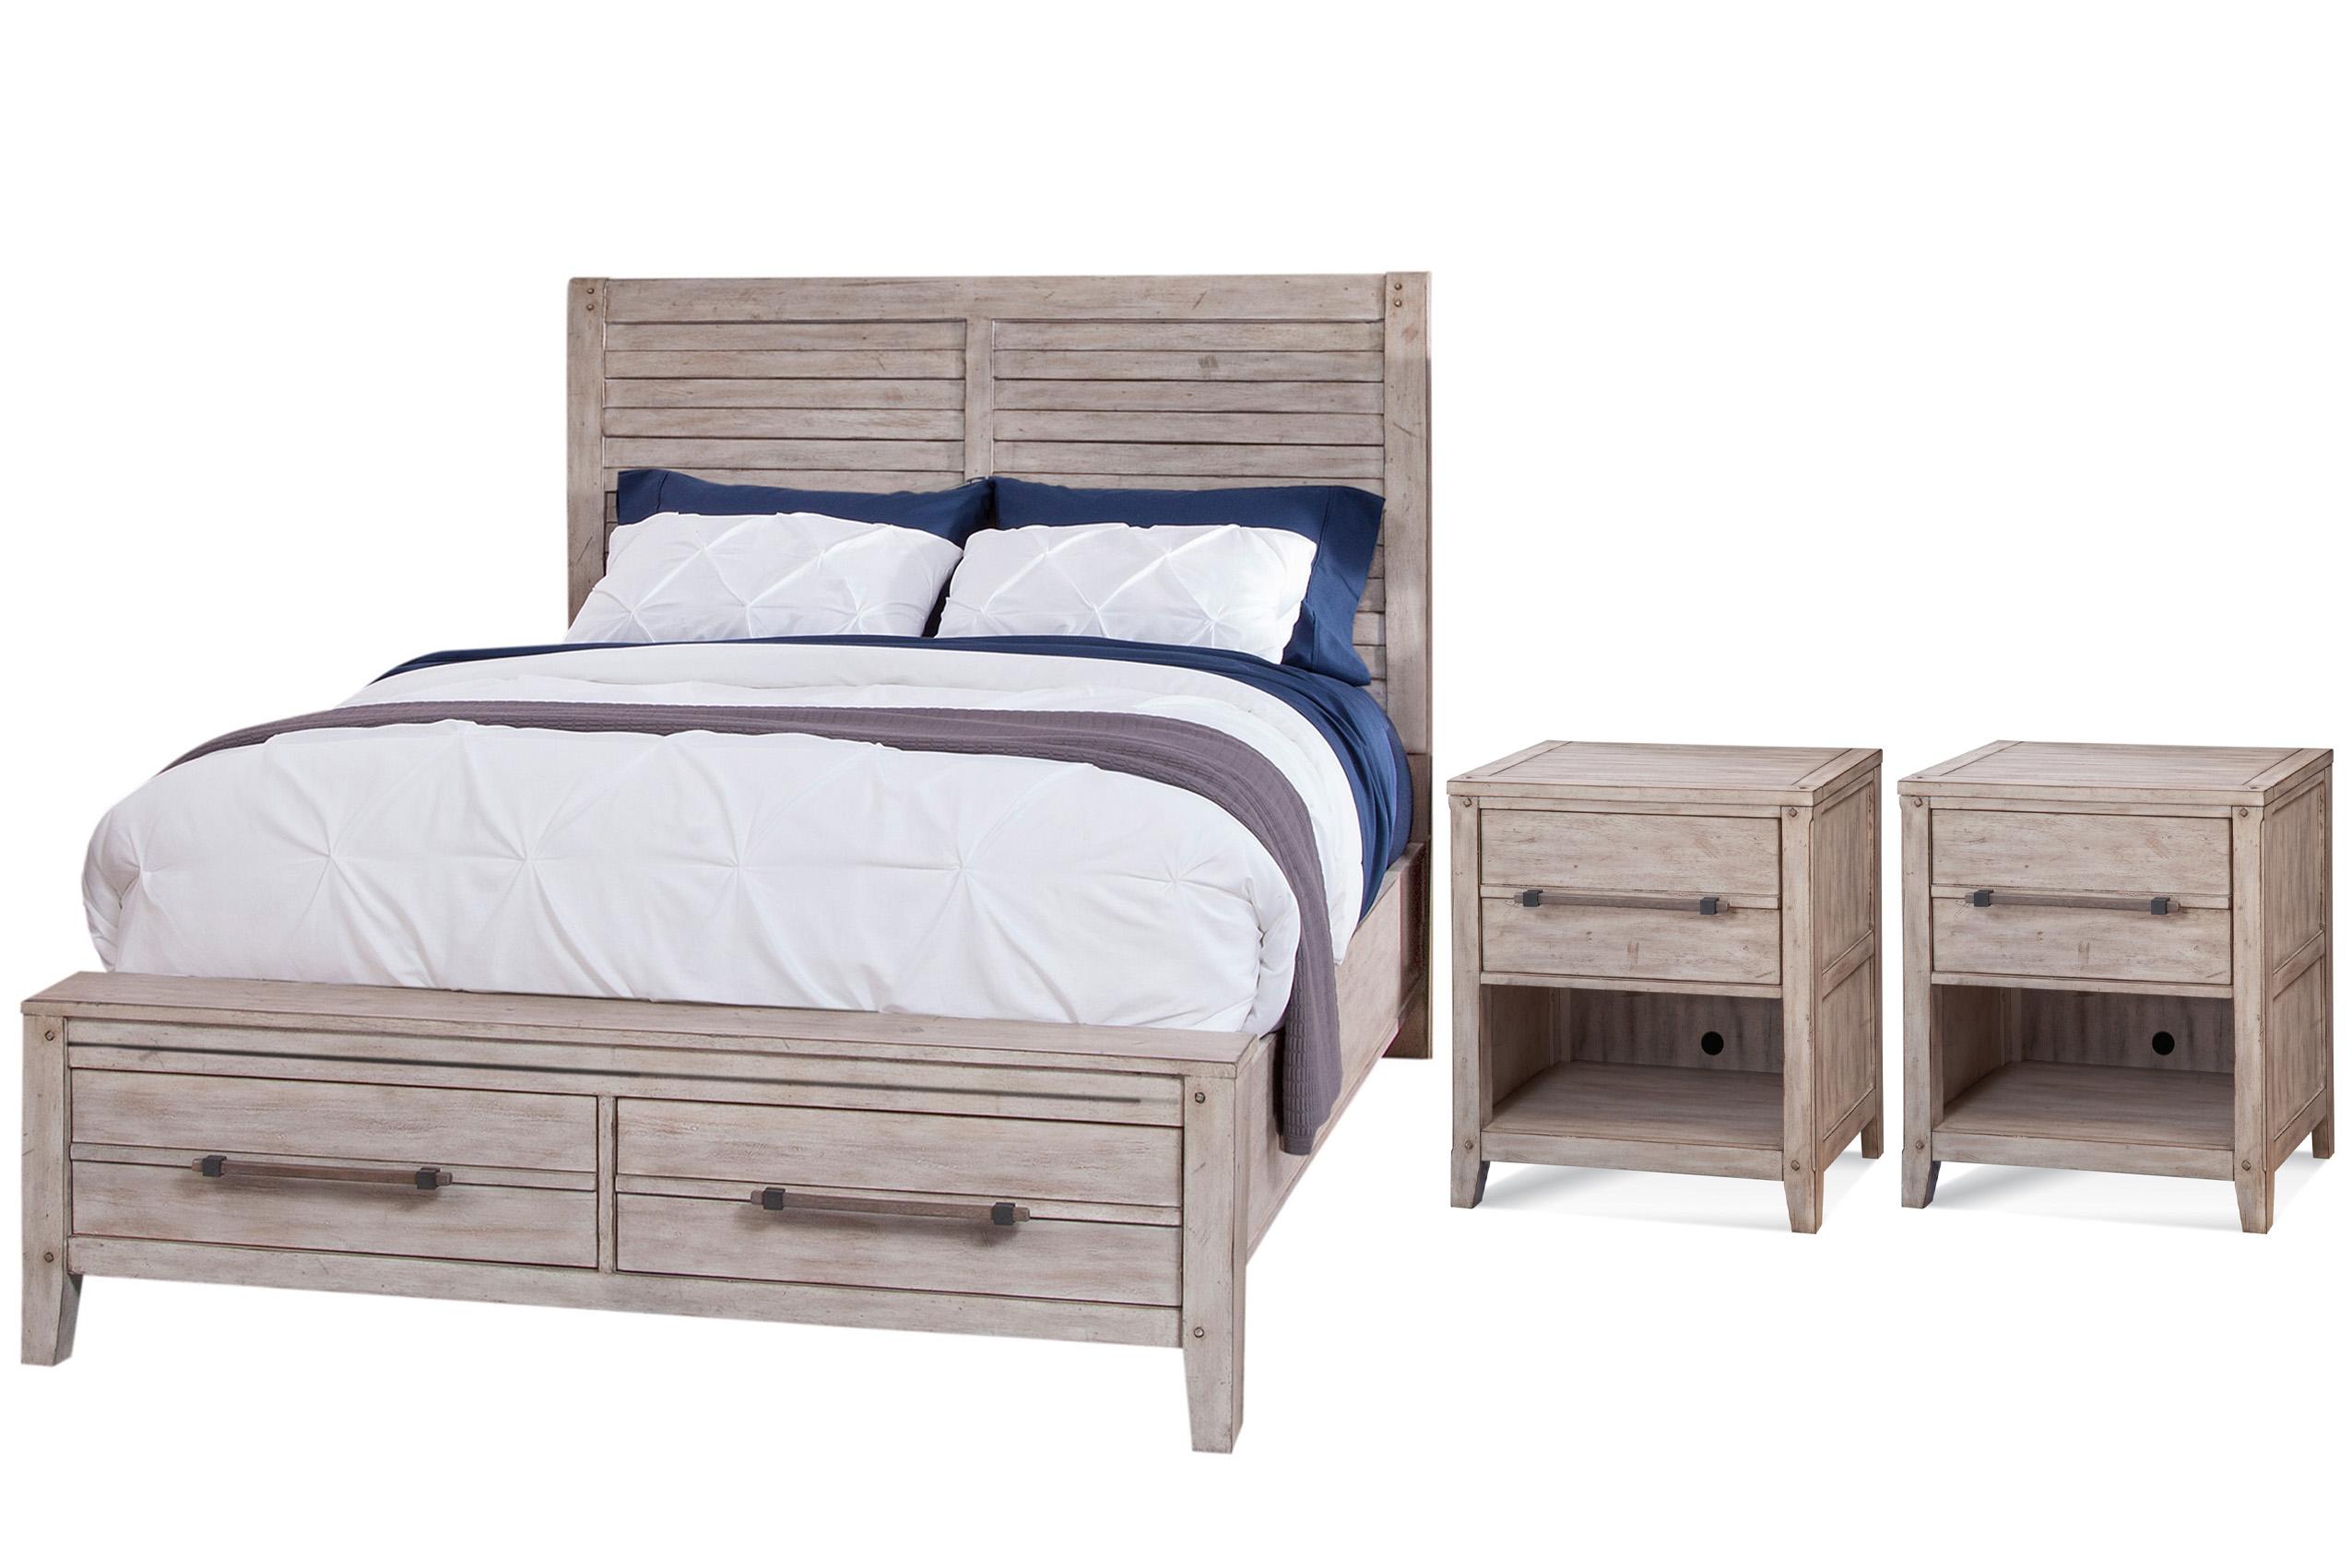 Classic, Traditional Panel Bedroom Set AURORA 2810-66PSB 2810-66PSB-2810-410-2N-3PC in whitewash 